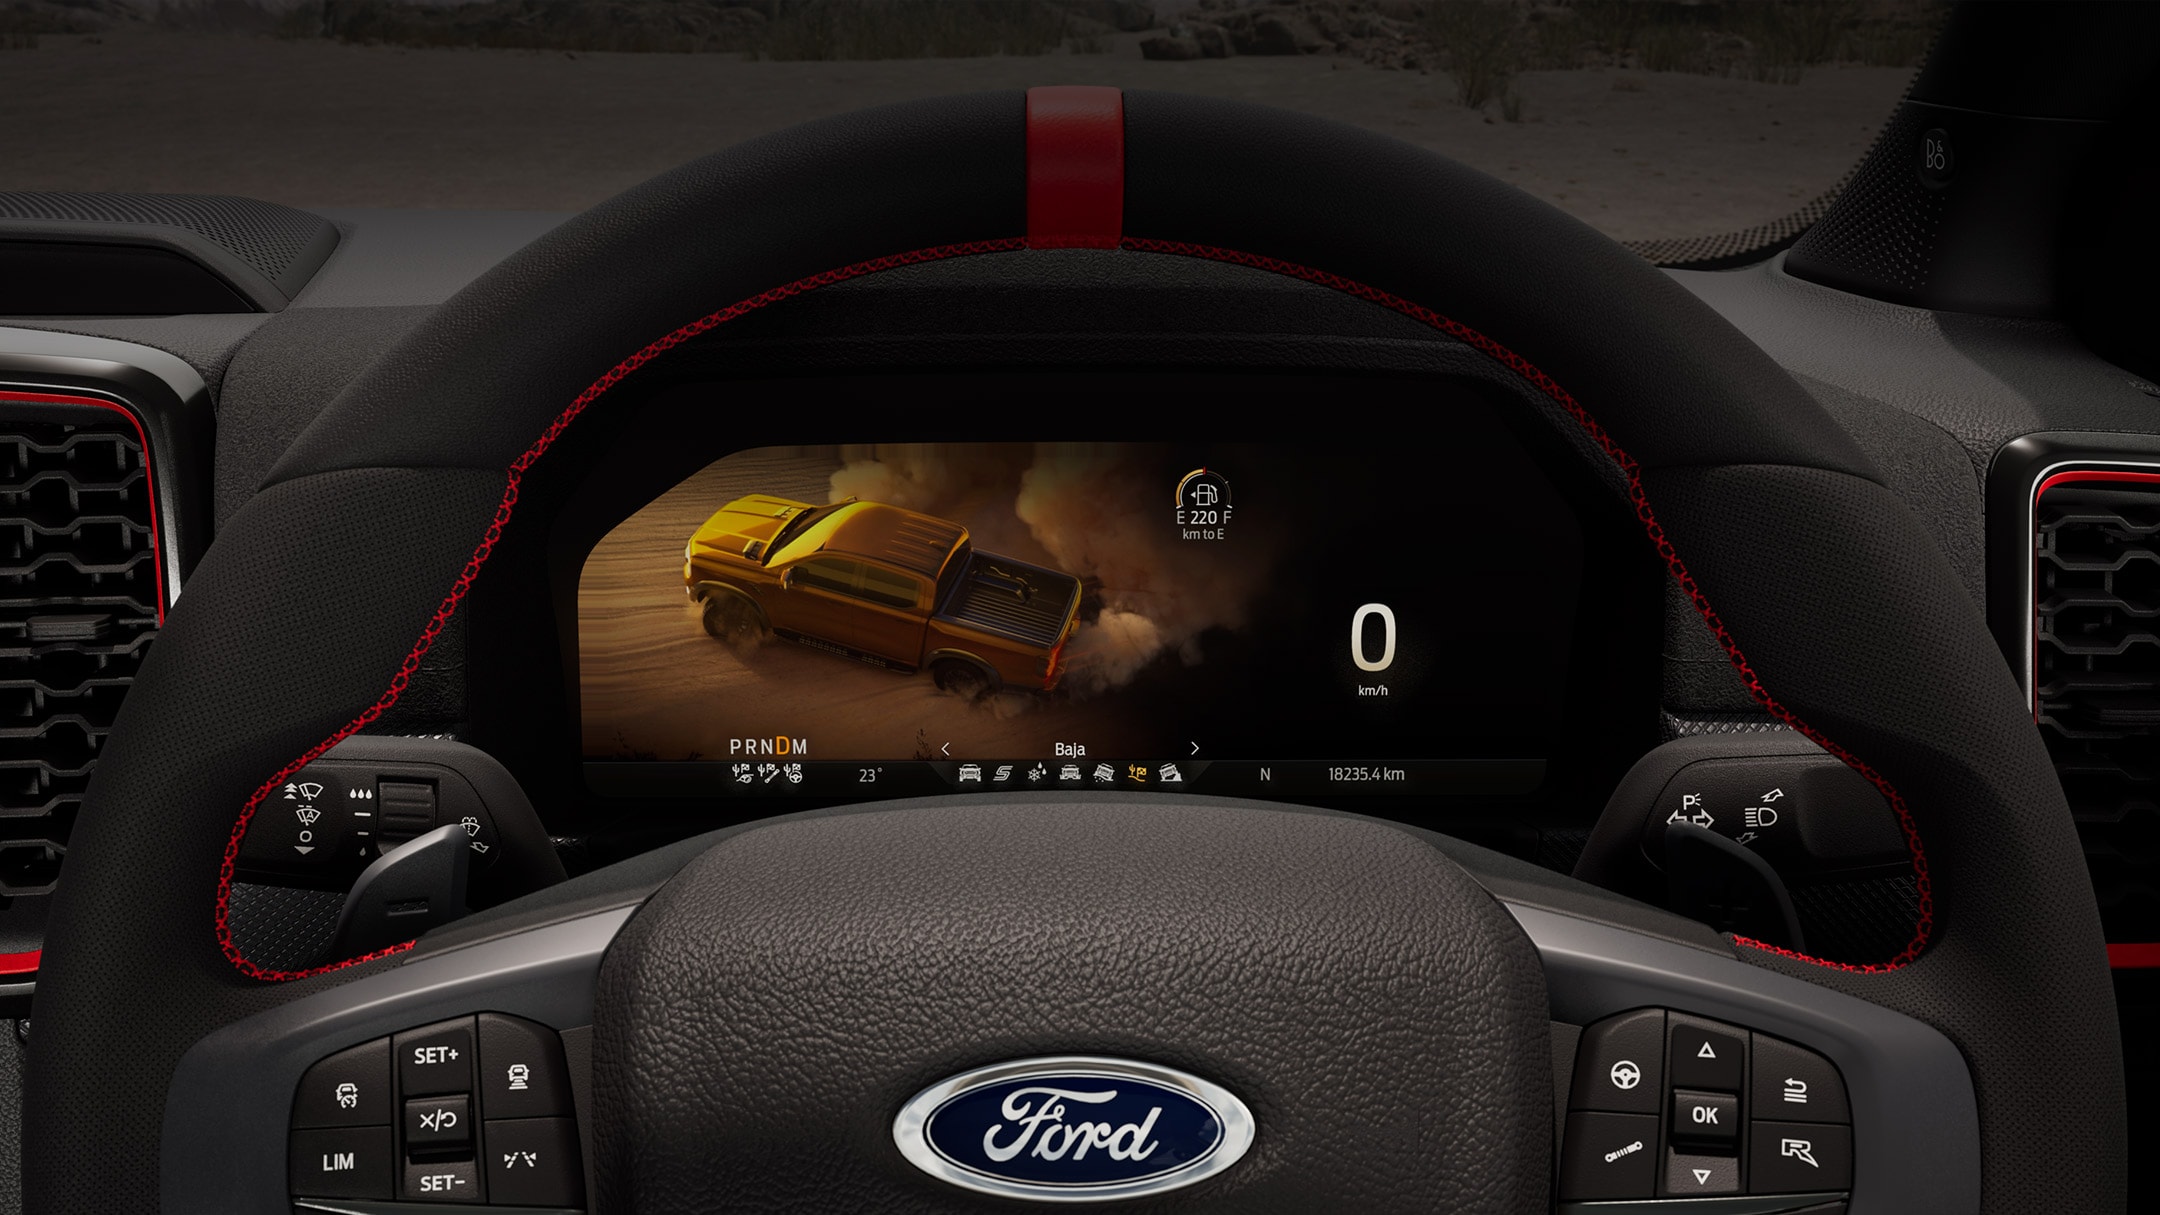 Computer render showing the steering wheel and dashboard panels.